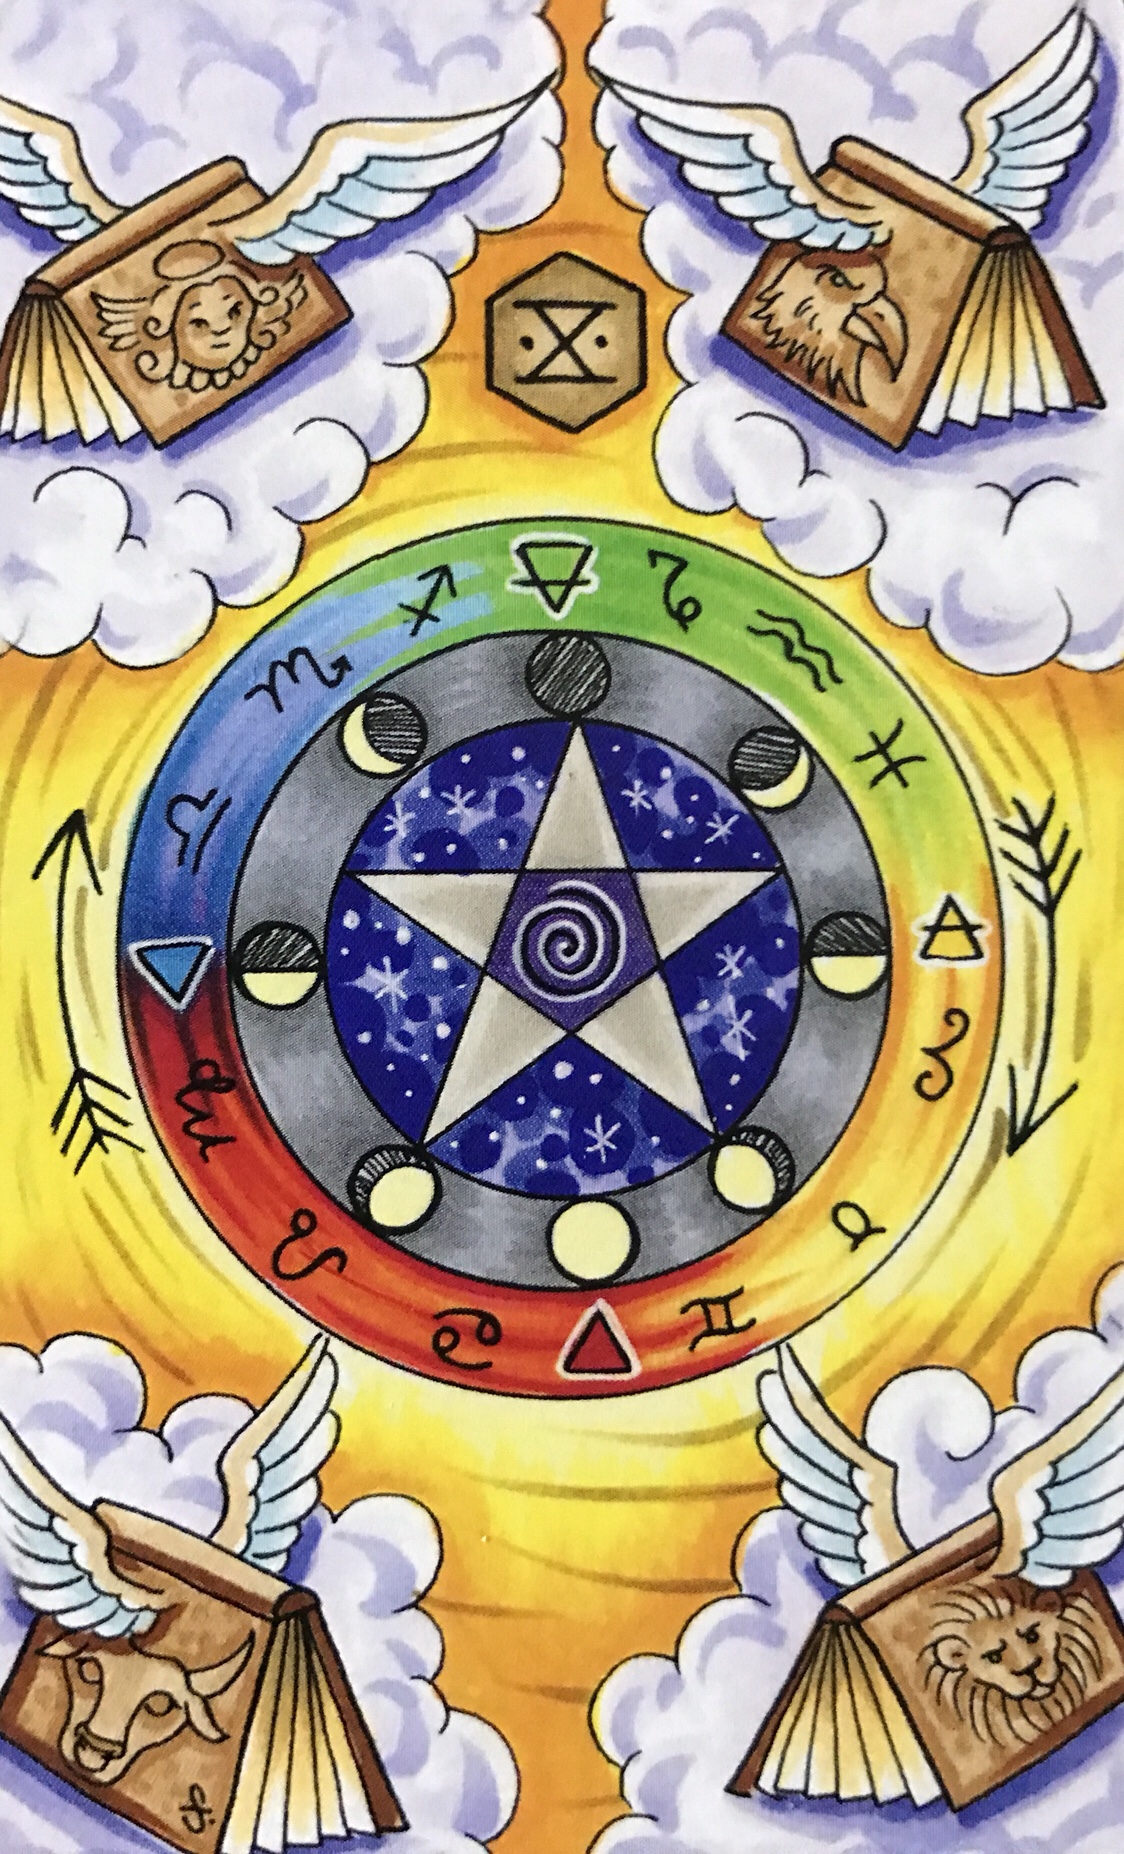 card-of-the-day-wheel-of-fortune-saturday-march-2-2019-tarot-by